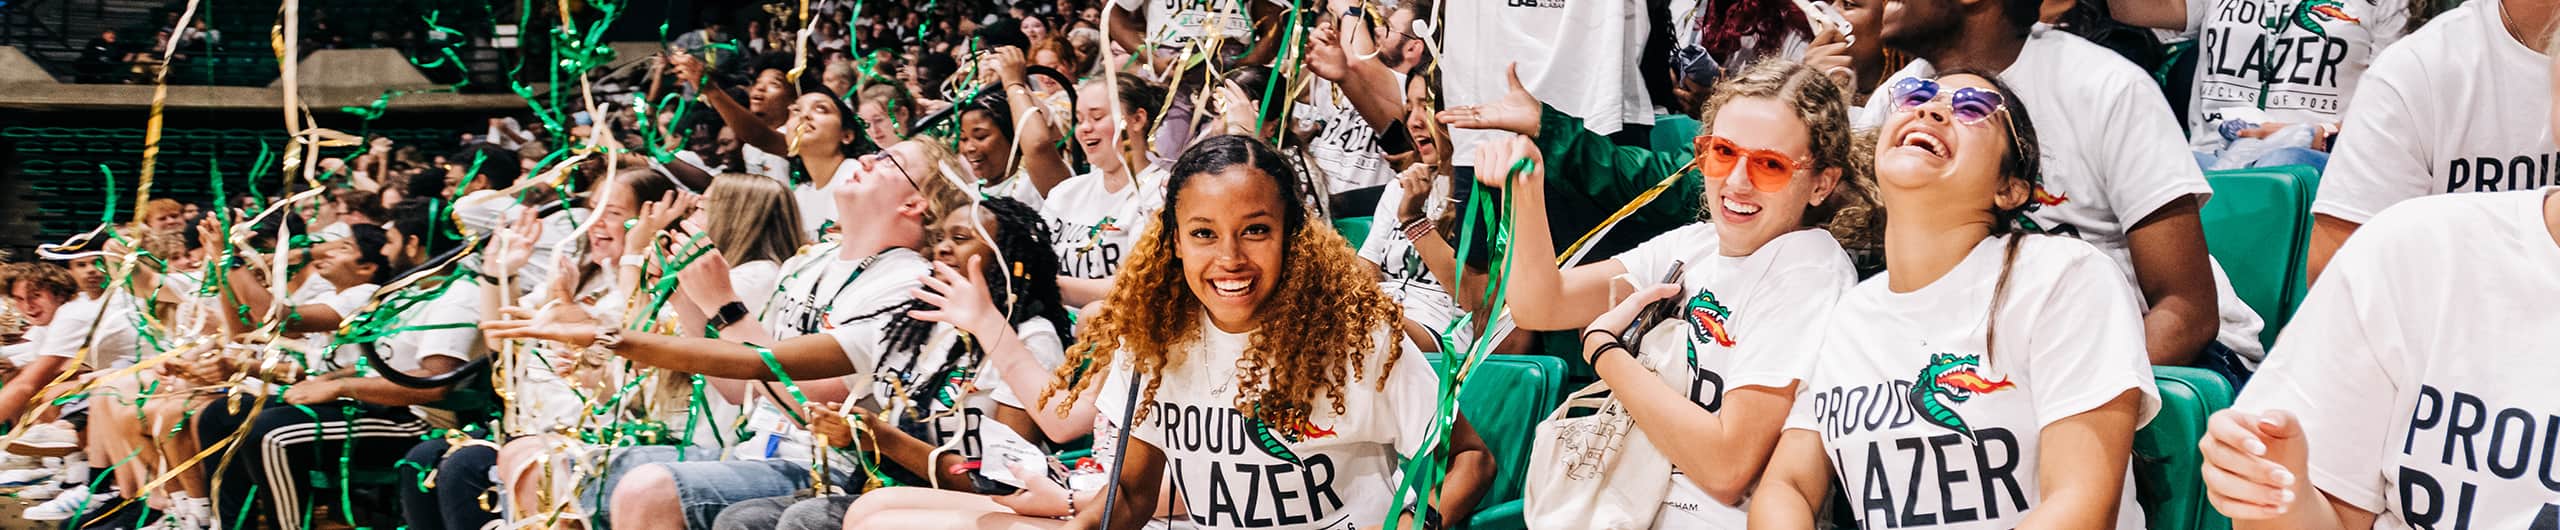 Smiling students at a spirit event wearing "Proud Blazer" T-shirts and throwing metallic green streamers. 